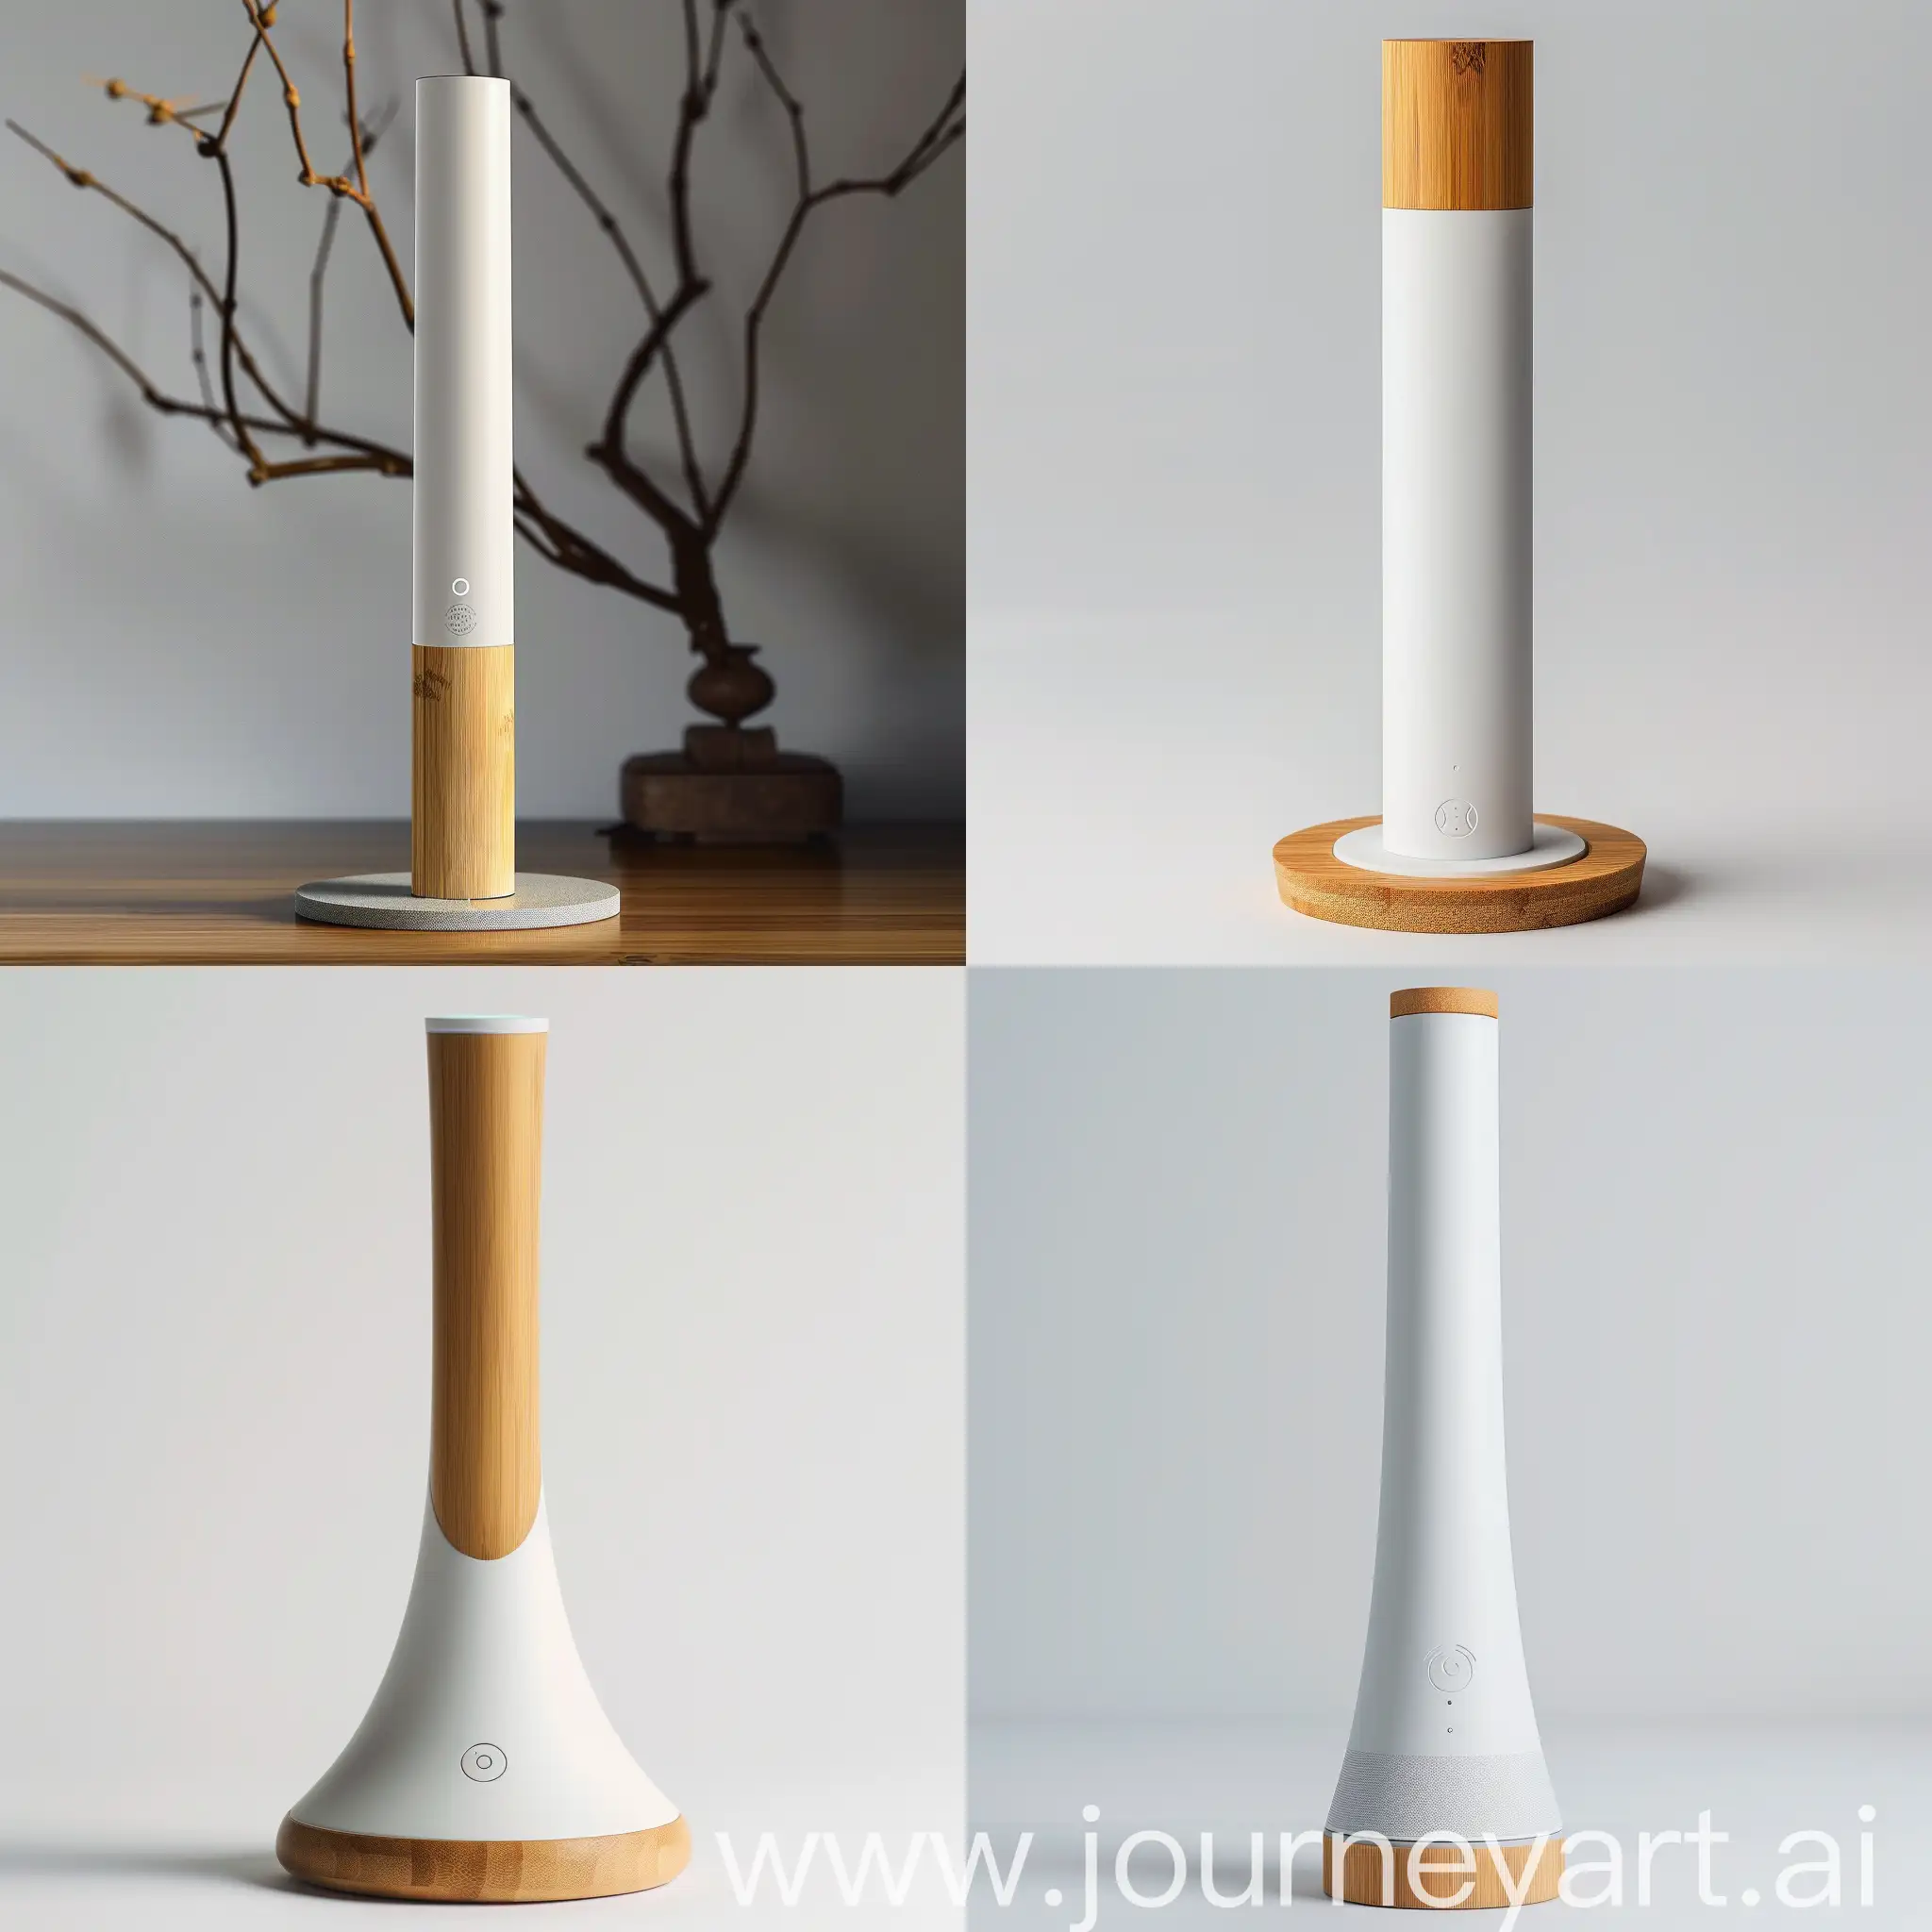 "Imagine a slender, stand-alone energy gateway with a slight taper towards the top, inspired by Japanese minimalism. The base is made of sustainable bamboo, while the body is constructed from recycled plastics, finished in white or light gray. Standing 30 cm tall with a circular base diameter of 8 cm, this device features soft LED lighting for notifications and a laser-engraved logo on the bamboo base. It serves as a central hub for smart home devices, simplifying energy management with a touch of japanese bamboo zen garden form and structure and Zen-inspired elegance, blending seamlessly into eco-conscious homes."realistic style